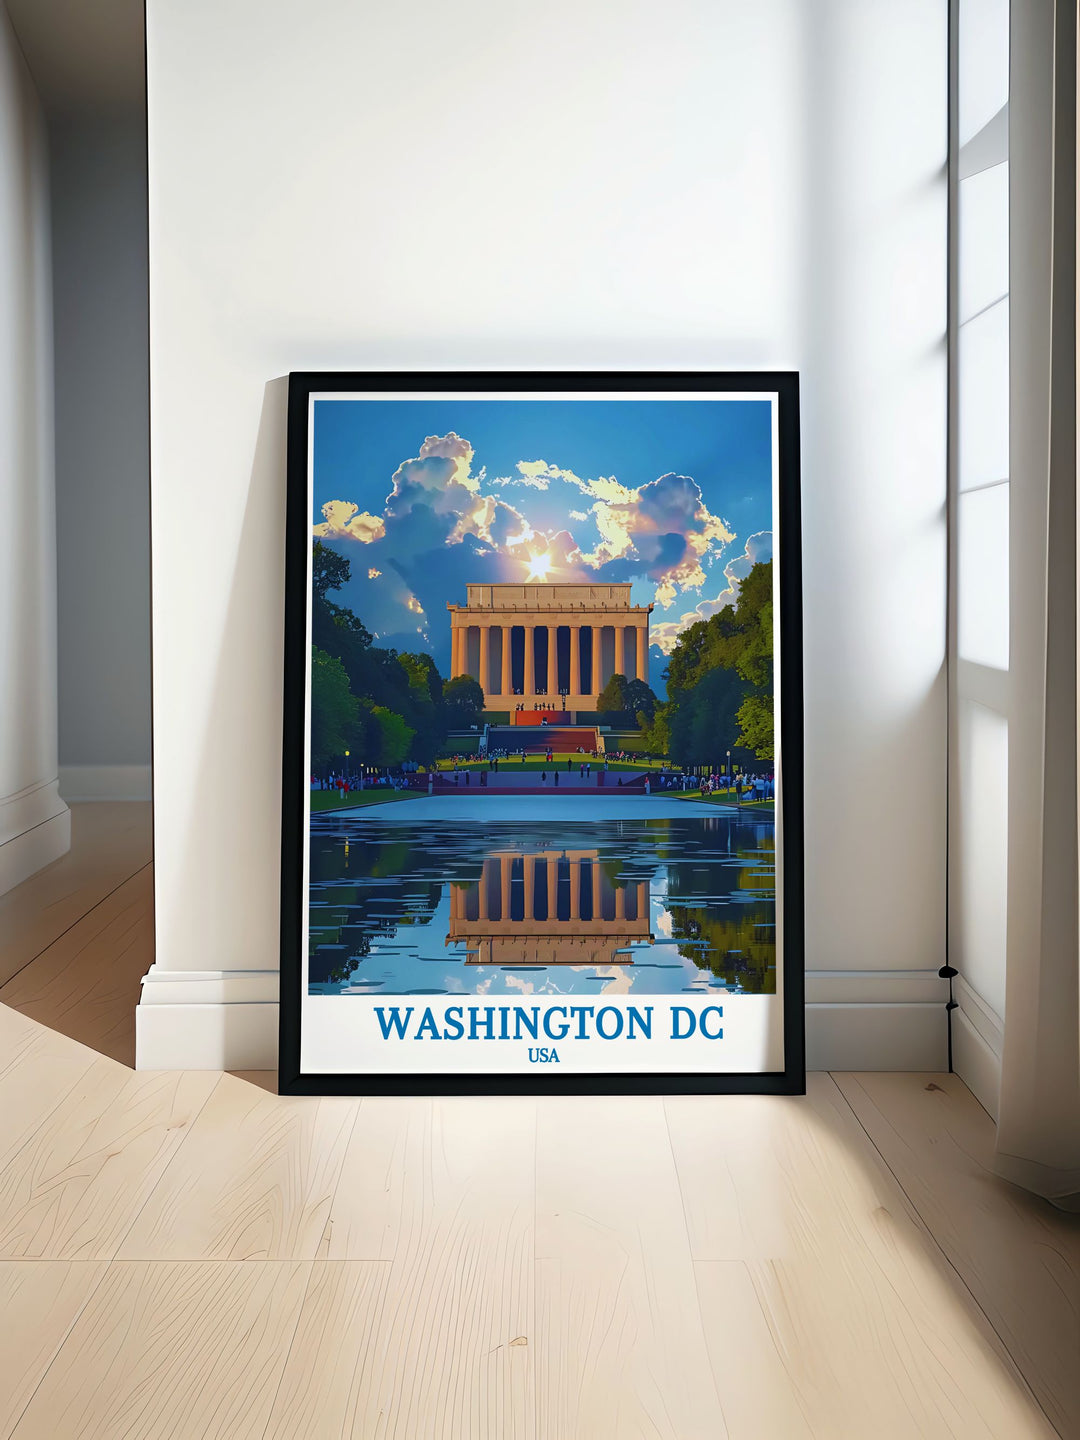 Washington DC print featuring The Lincoln Memorial in a detailed black and white fine line style perfect for home decor and gifting occasions like birthdays and anniversaries